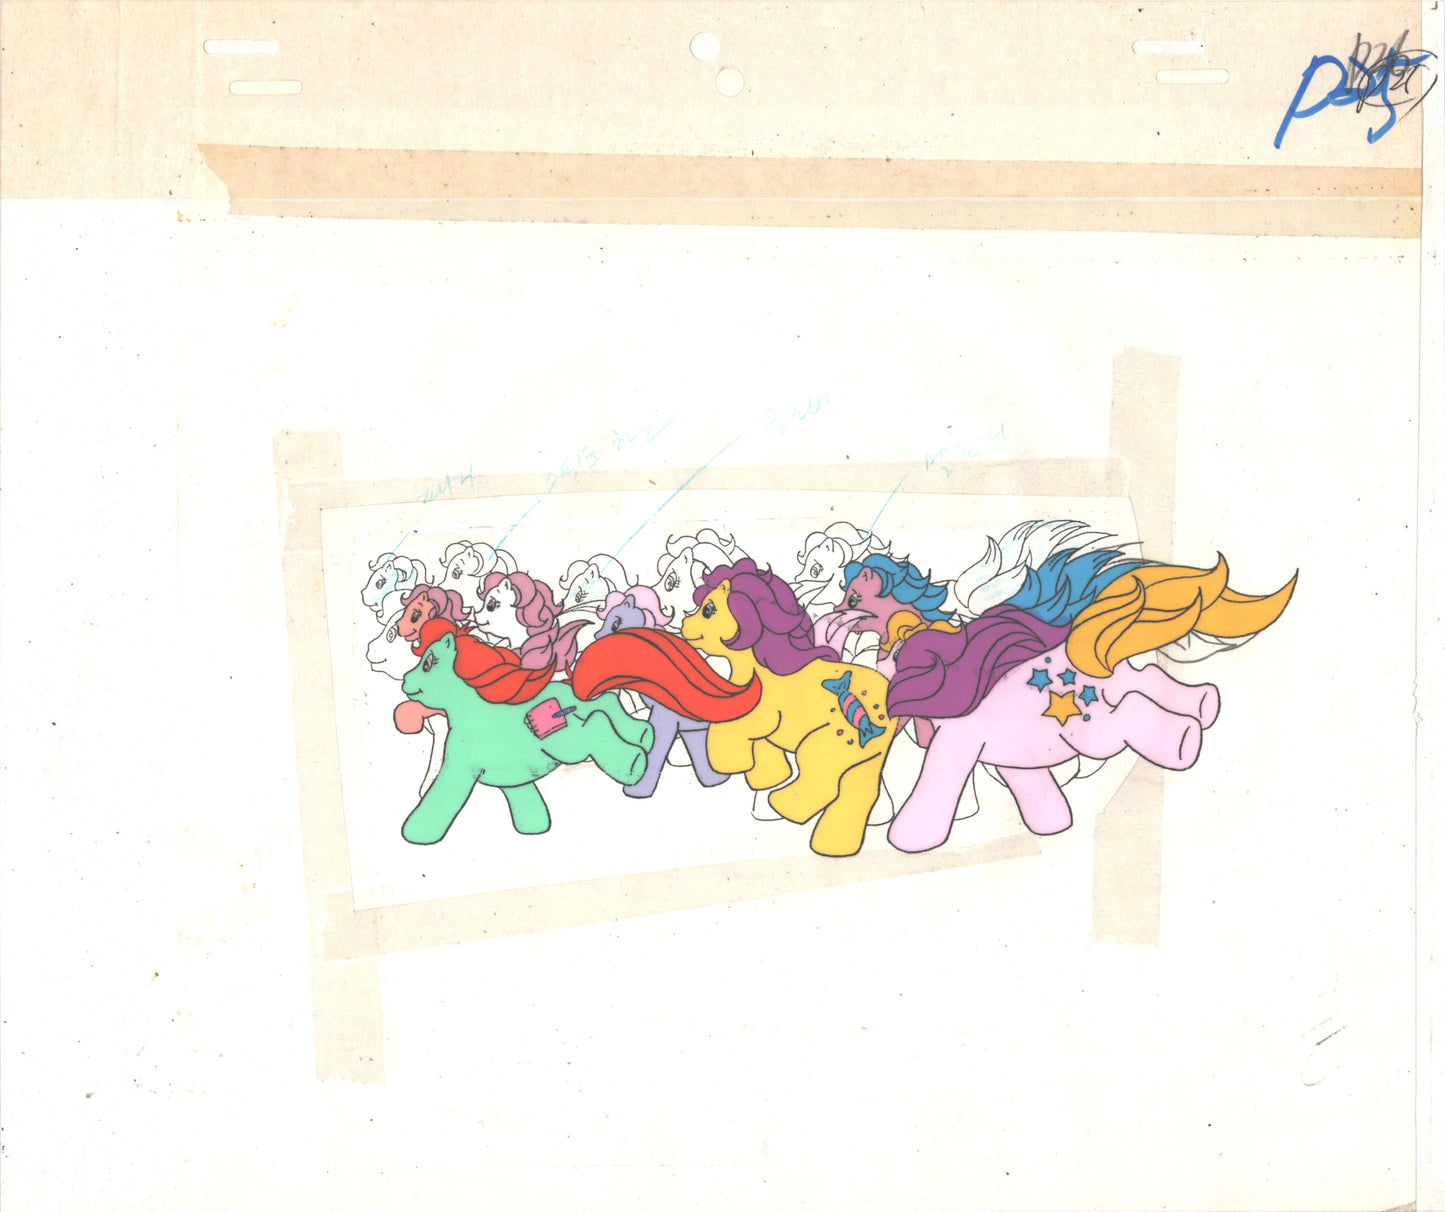 My Little Pony Original Production Animation Cel Hasbro Sunbow 1980s or 90s Used to Make the Cartoon G-P25